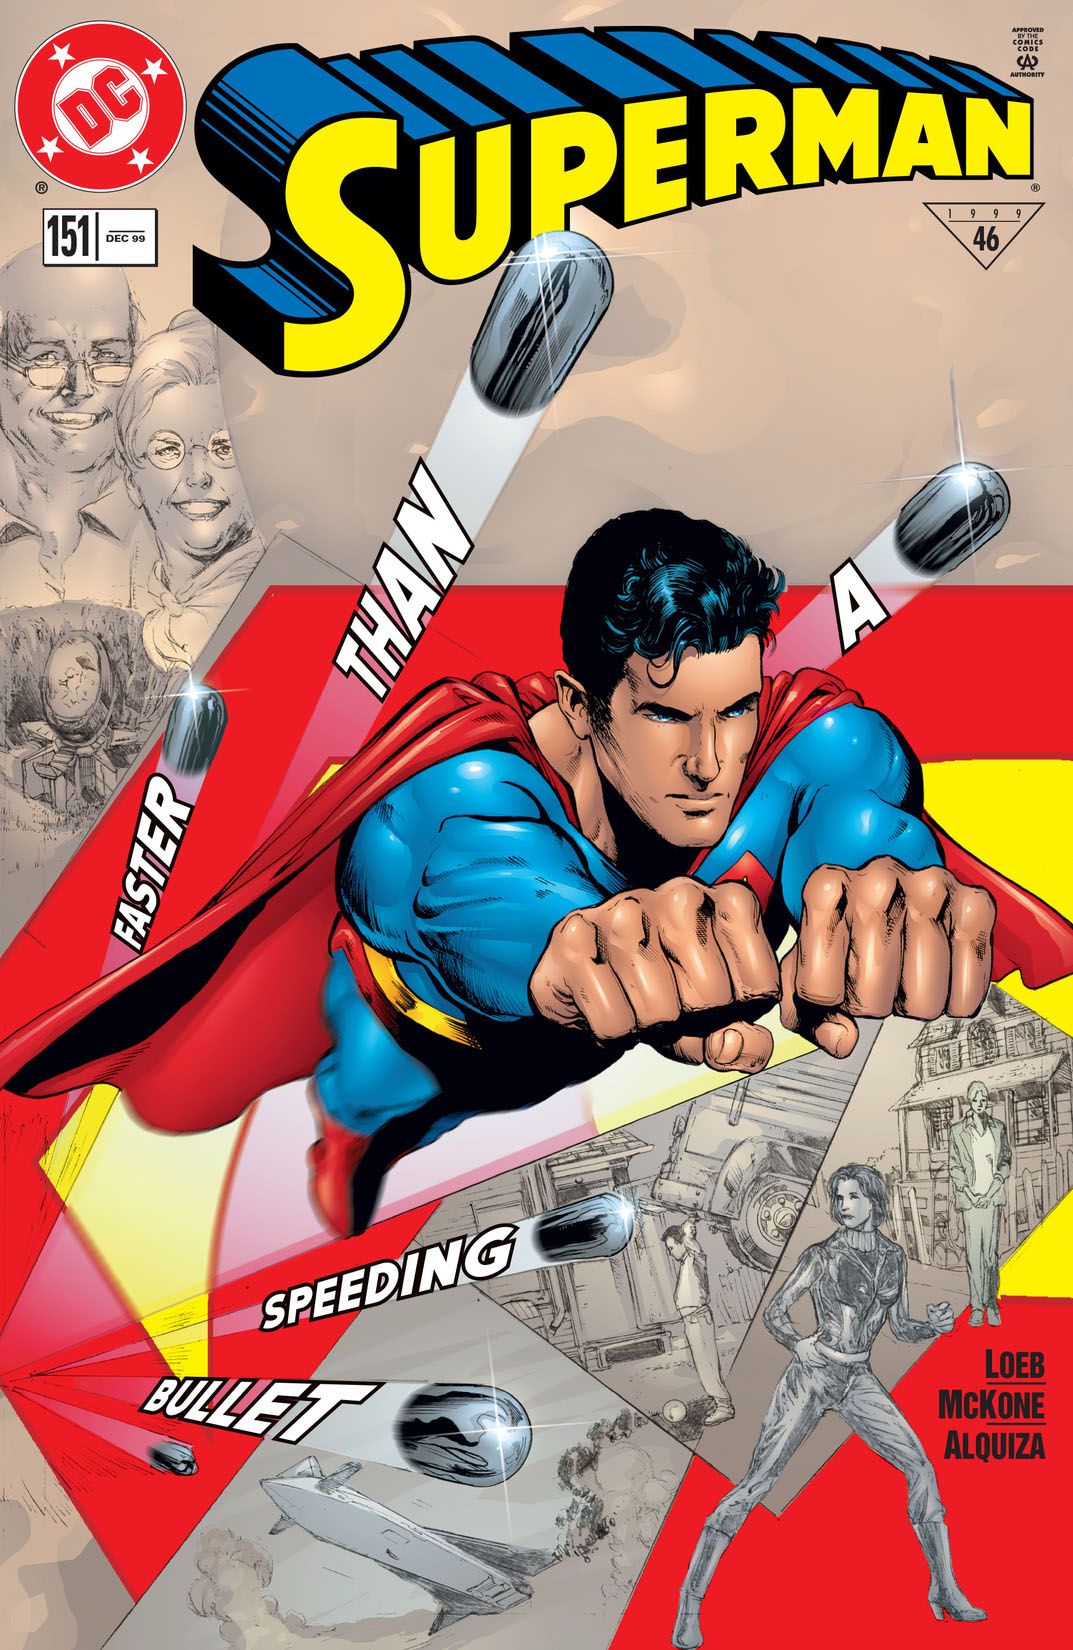 Superman (1986-2006) #151 preview images